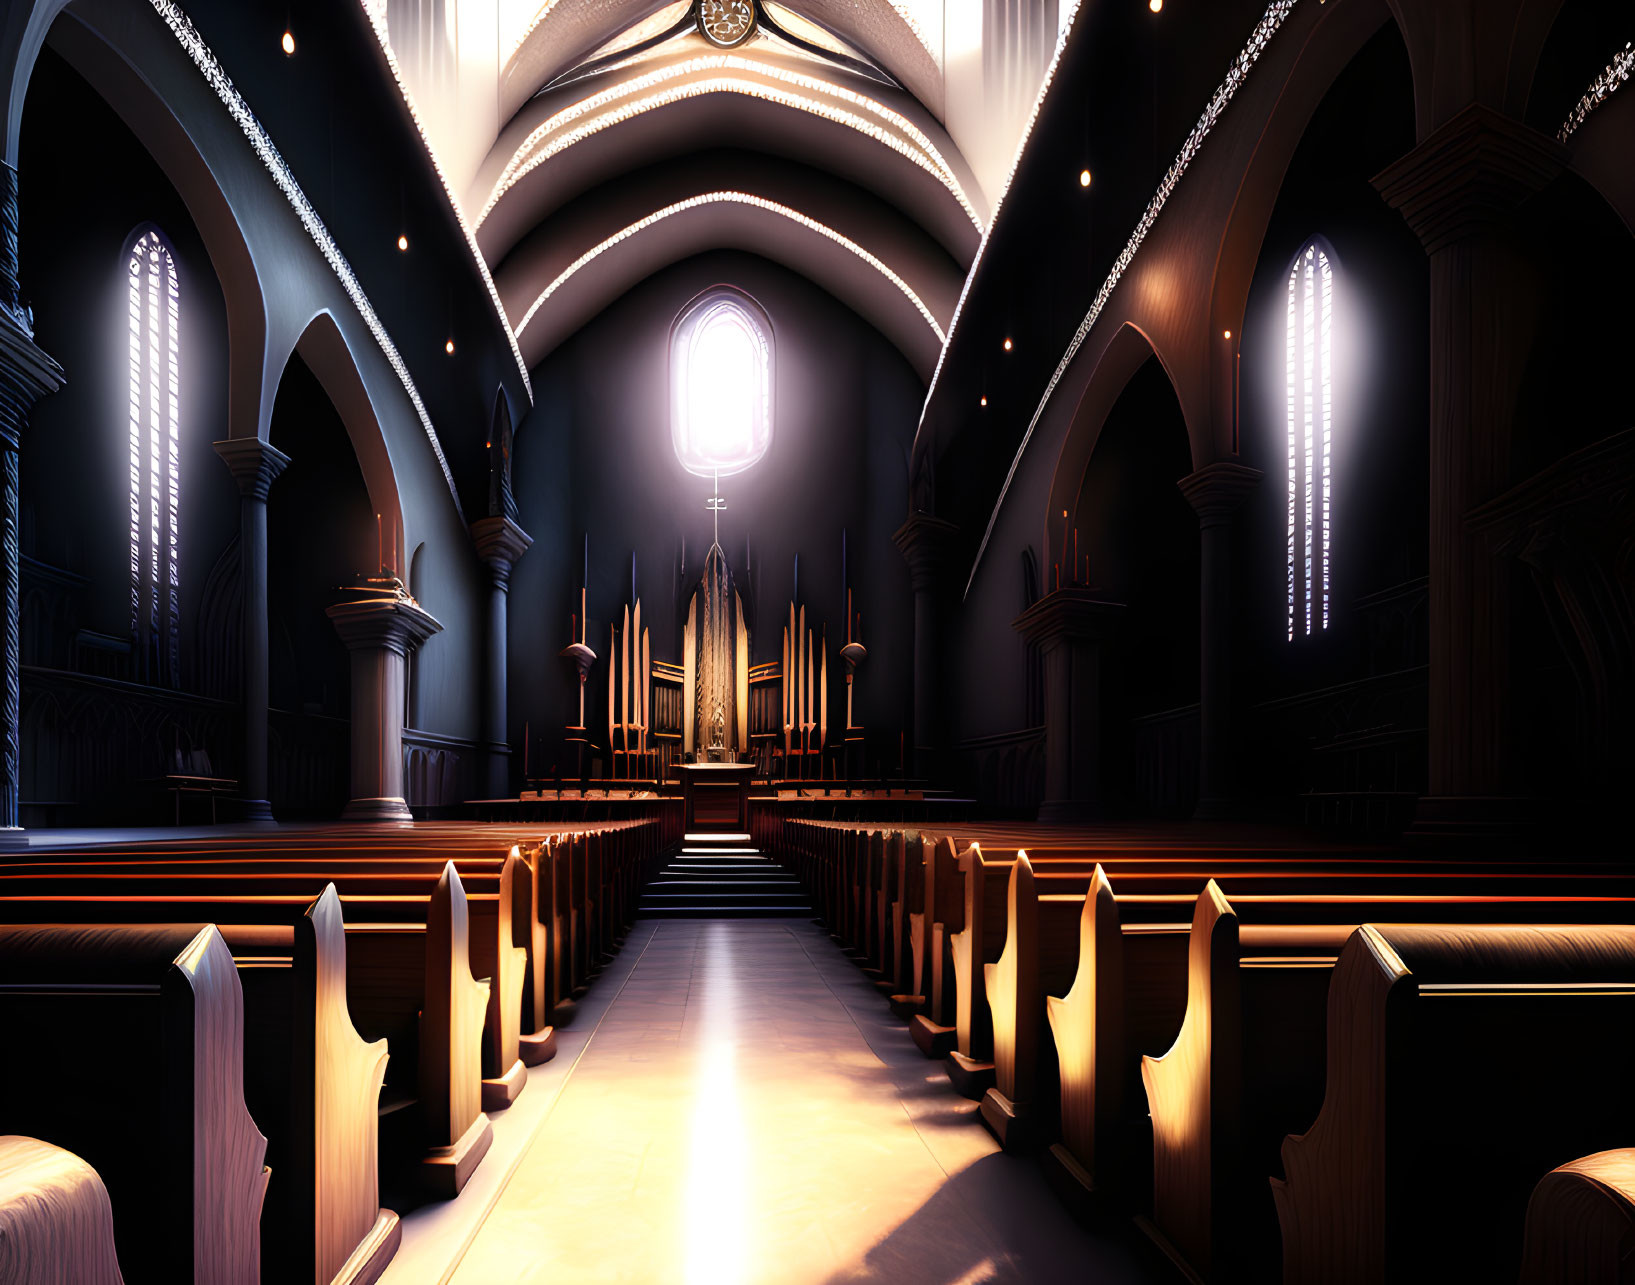 Dimly Lit Church Interior with Wooden Pews and Illuminated Altar